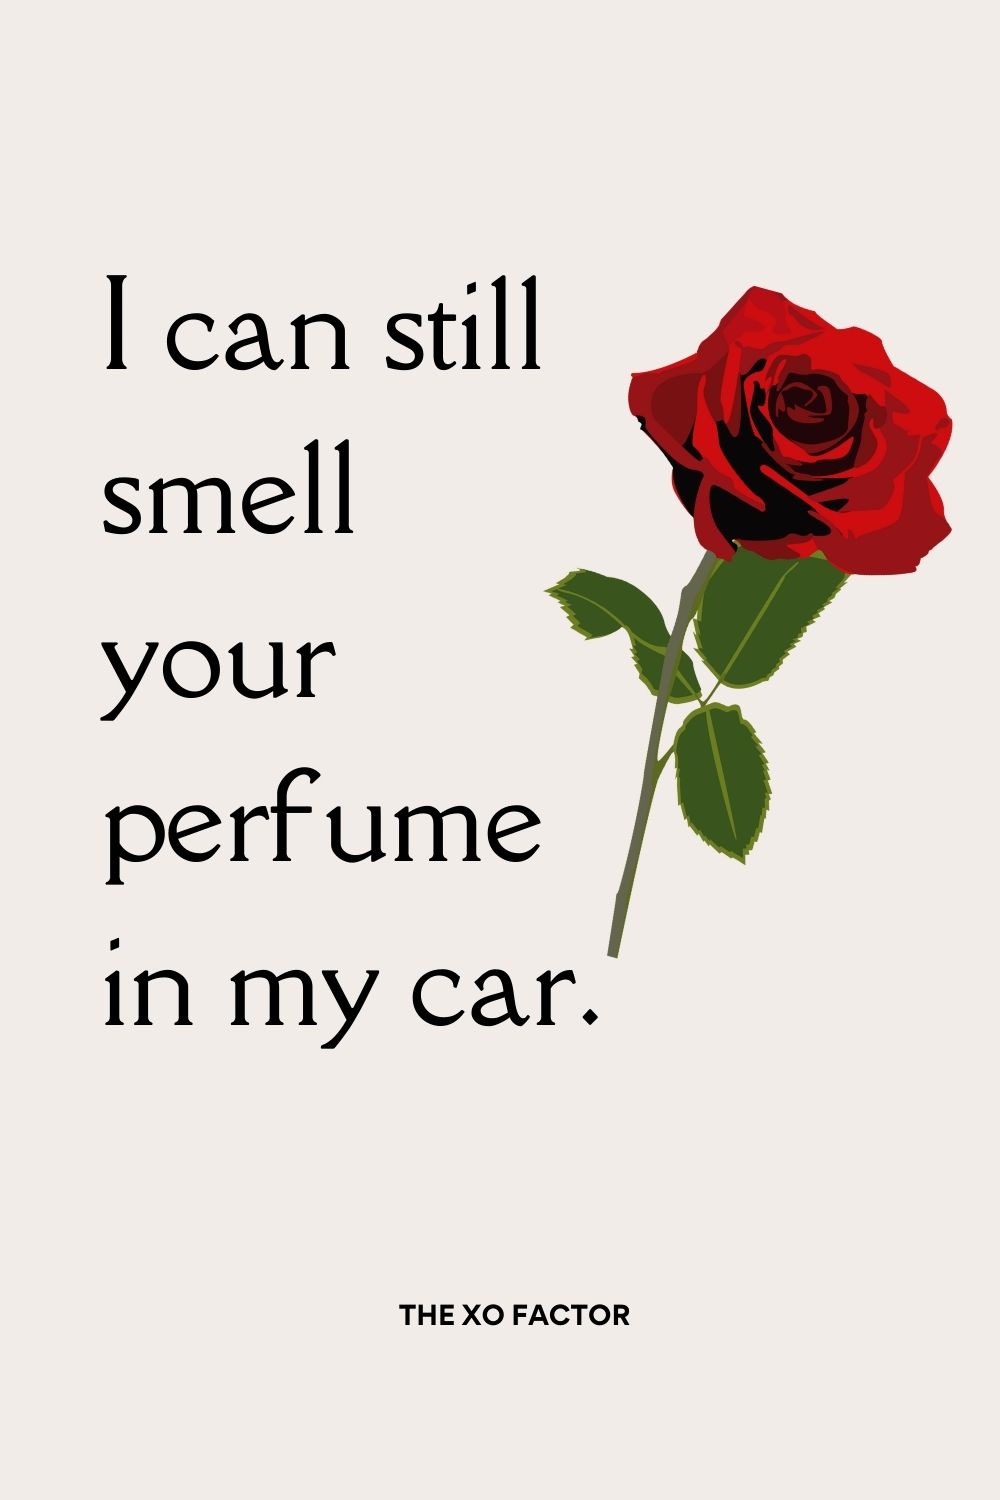 I can still smell your perfume in my car.